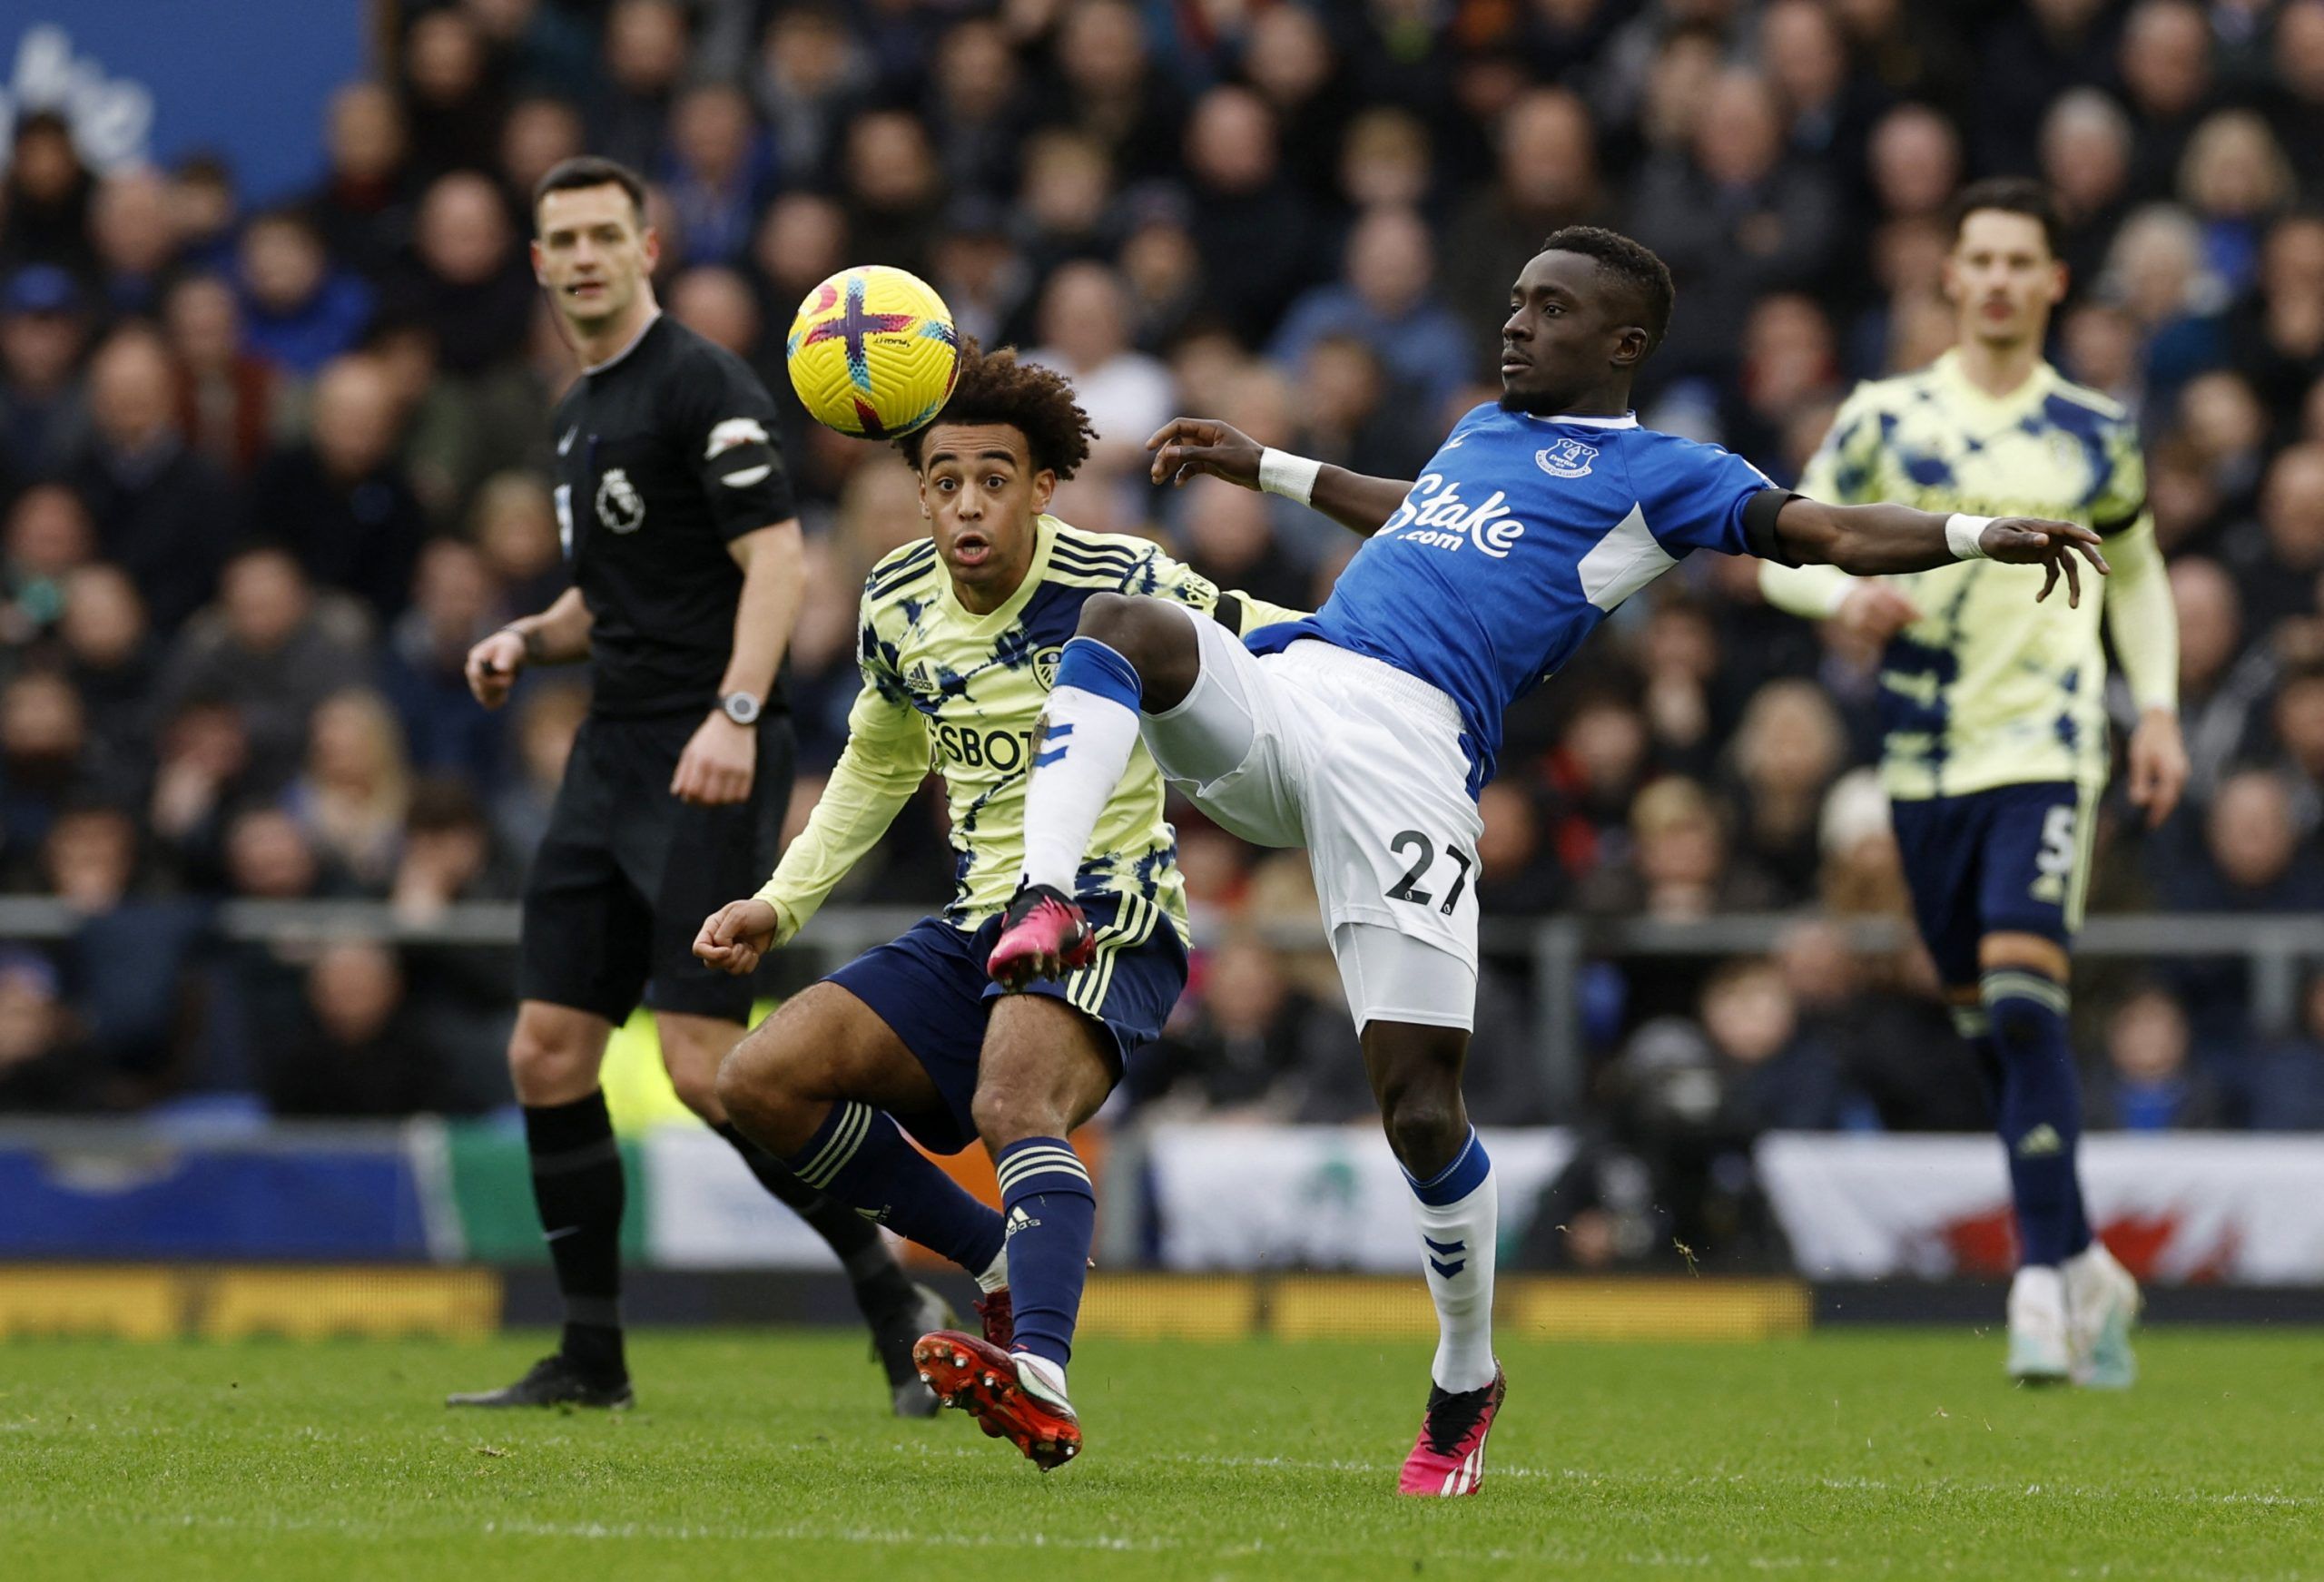 Soccer Football - Premier League - Everton v Leeds United - Goodison Park, Liverpool, Britain - February 18, 2023 Everton's Idrissa Gueye in action with Leeds United's Tyler Adams Action Images via Reuters/Jason Cairnduff EDITORIAL USE ONLY. No use with unauthorized audio, video, data, fixture lists, club/league logos or 'live' services. Online in-match use limited to 75 images, no video emulation. No use in betting, games or single club /league/player publications.  Please contact your account 